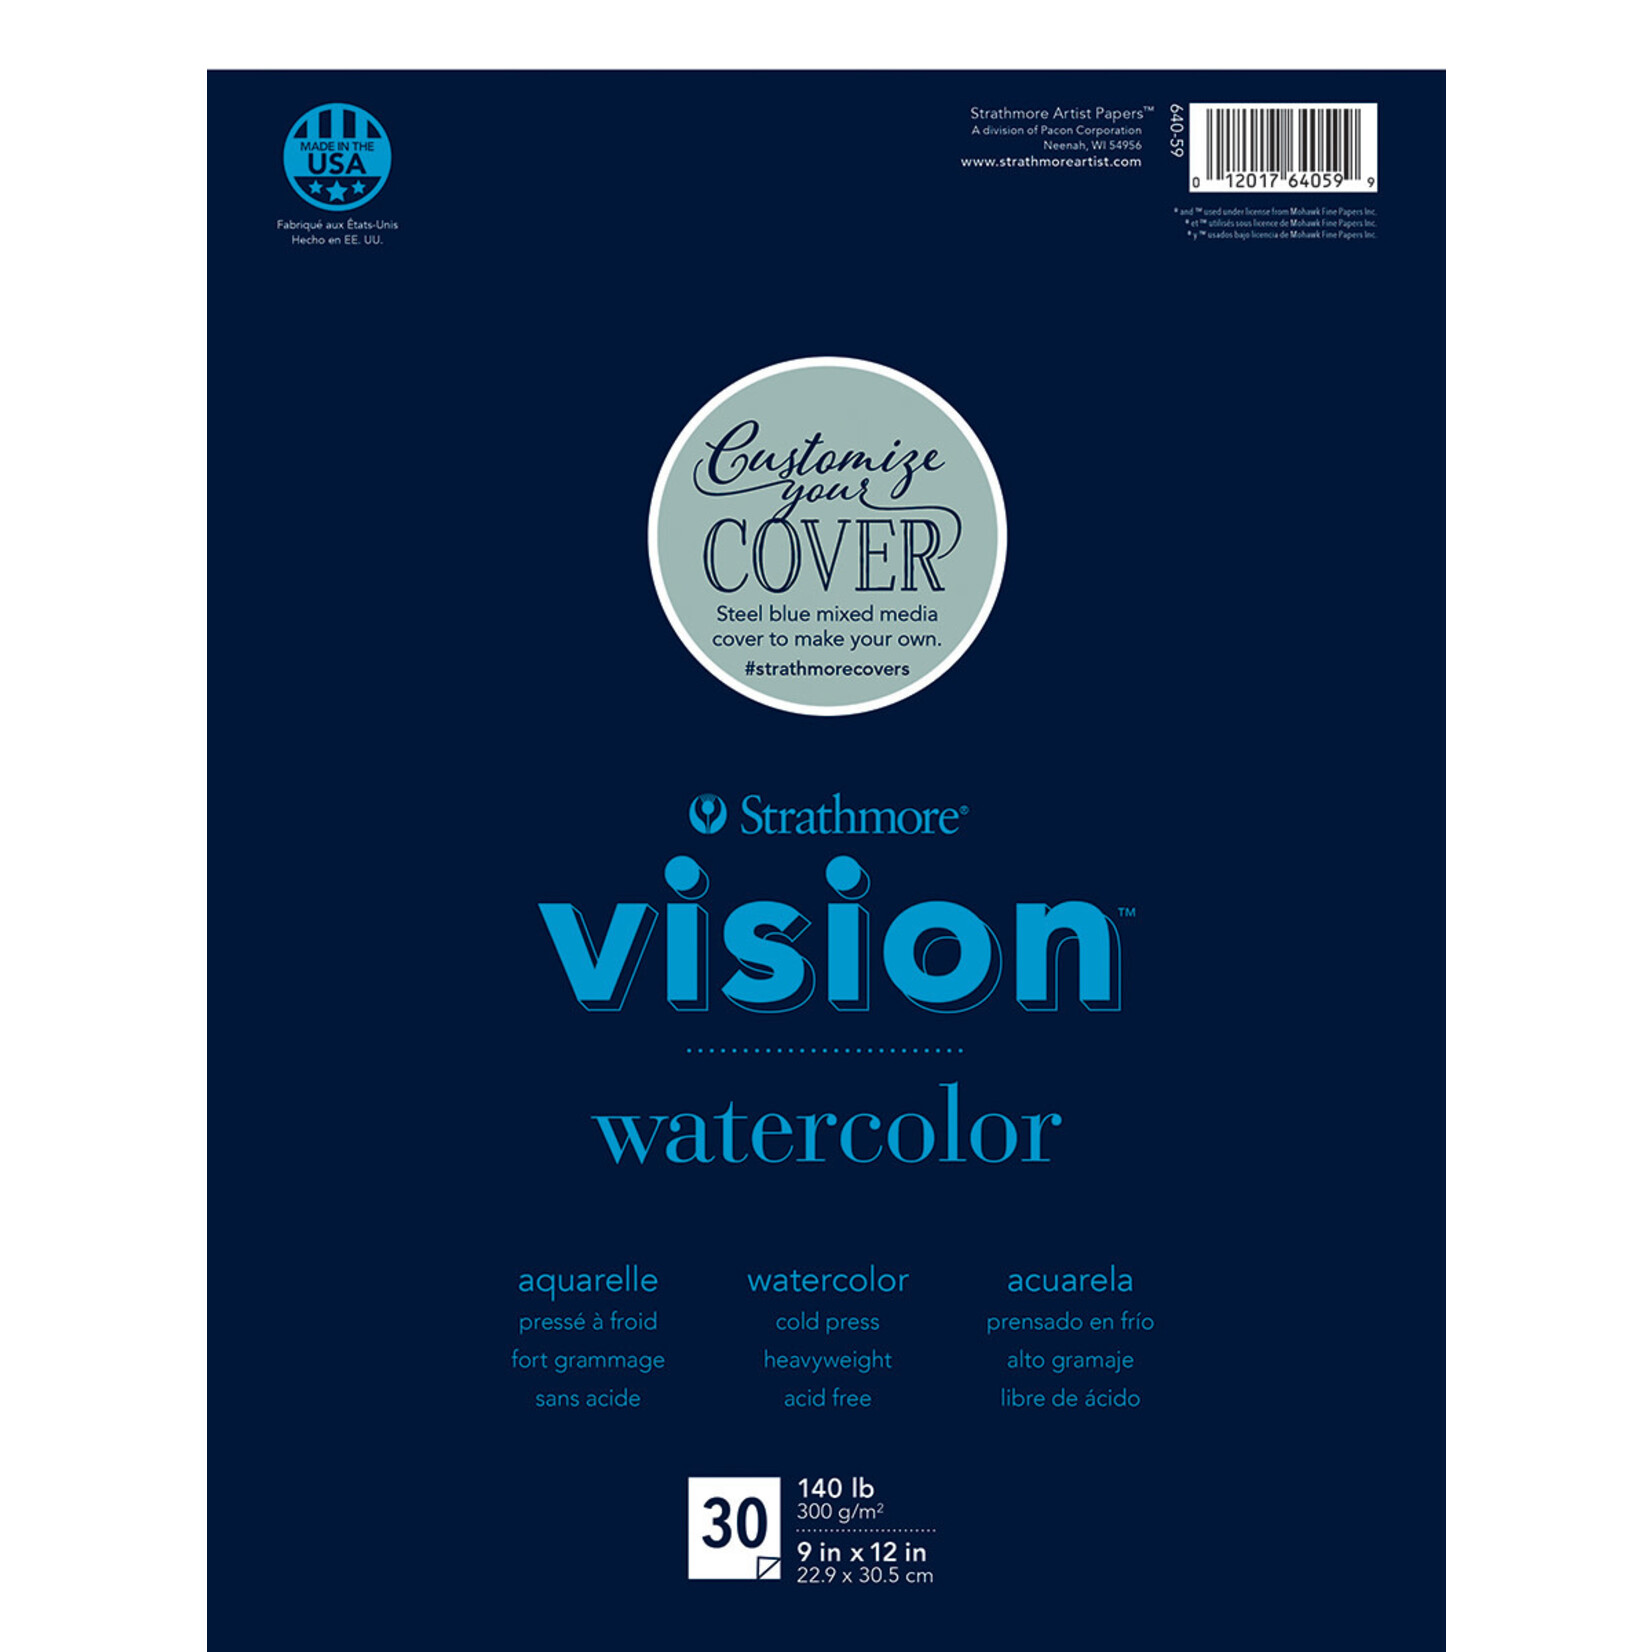 Strathmore Vision Watercolor Paper Pads, 9" x 12" - 30/Sht. Glue Bound